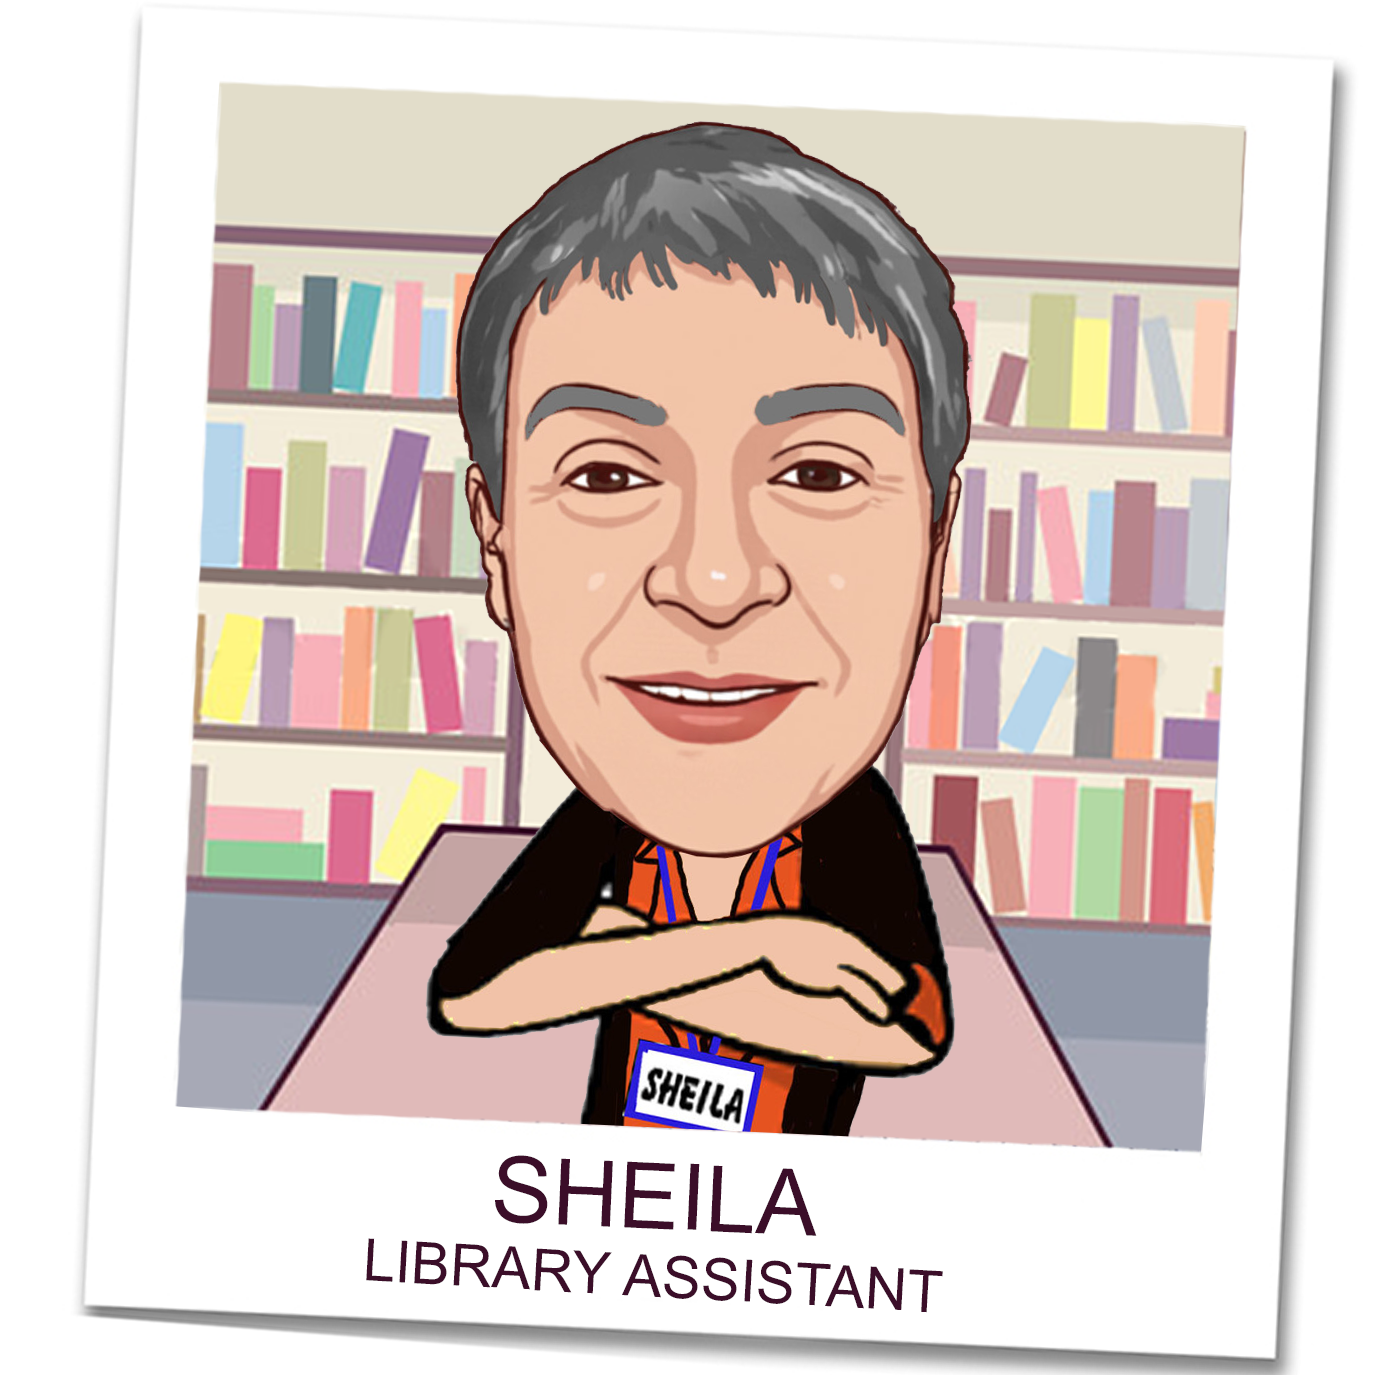 Sheila, Library Assistant